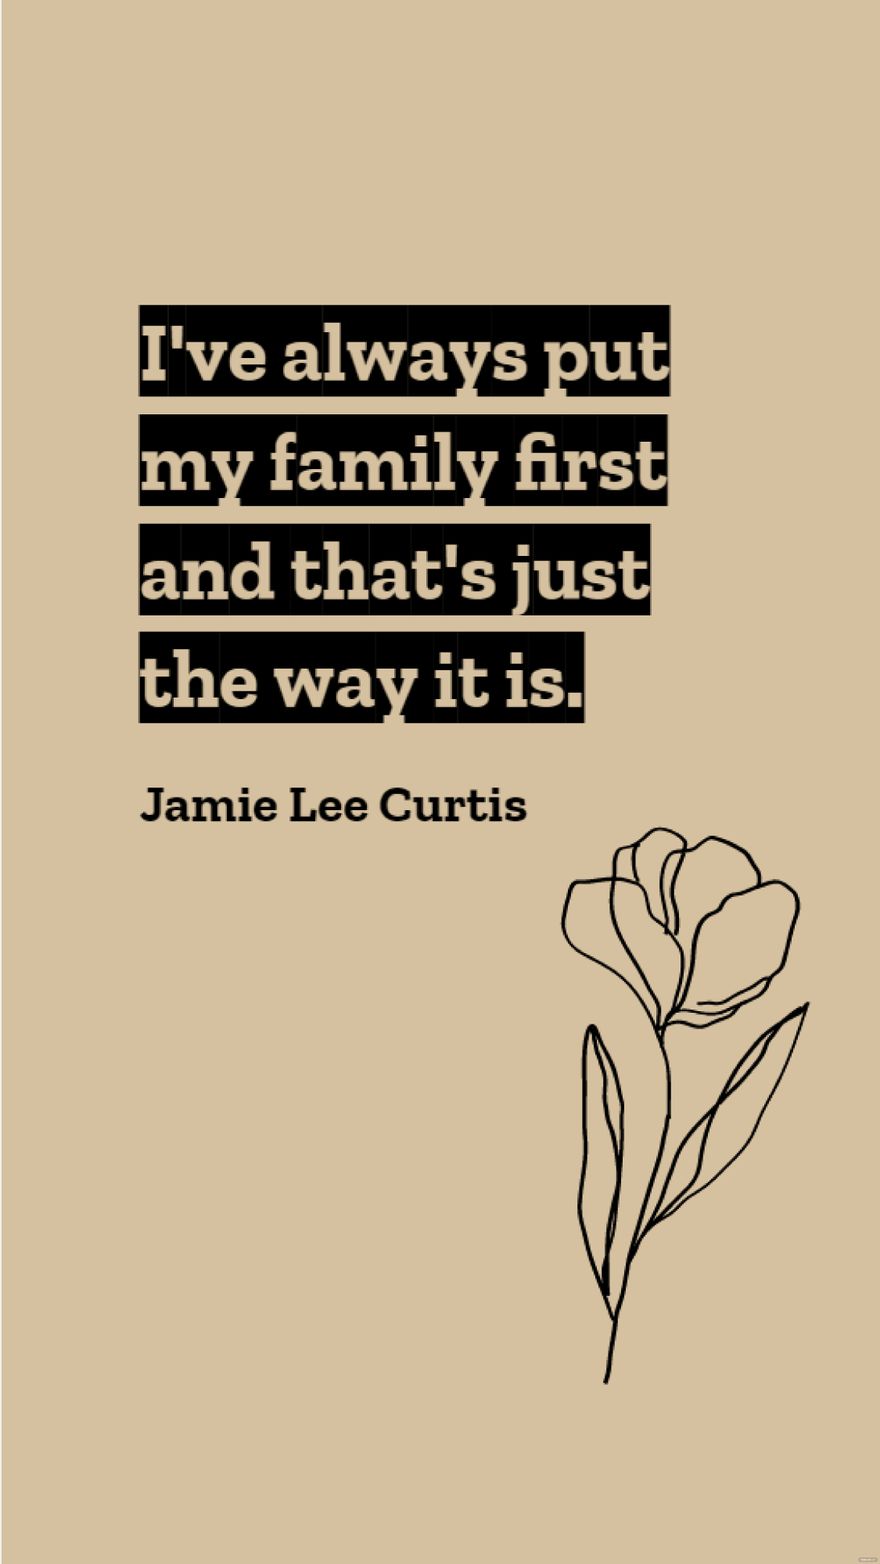 Free Jamie Lee Curtis - I've always put my family first and that's just the way it is.